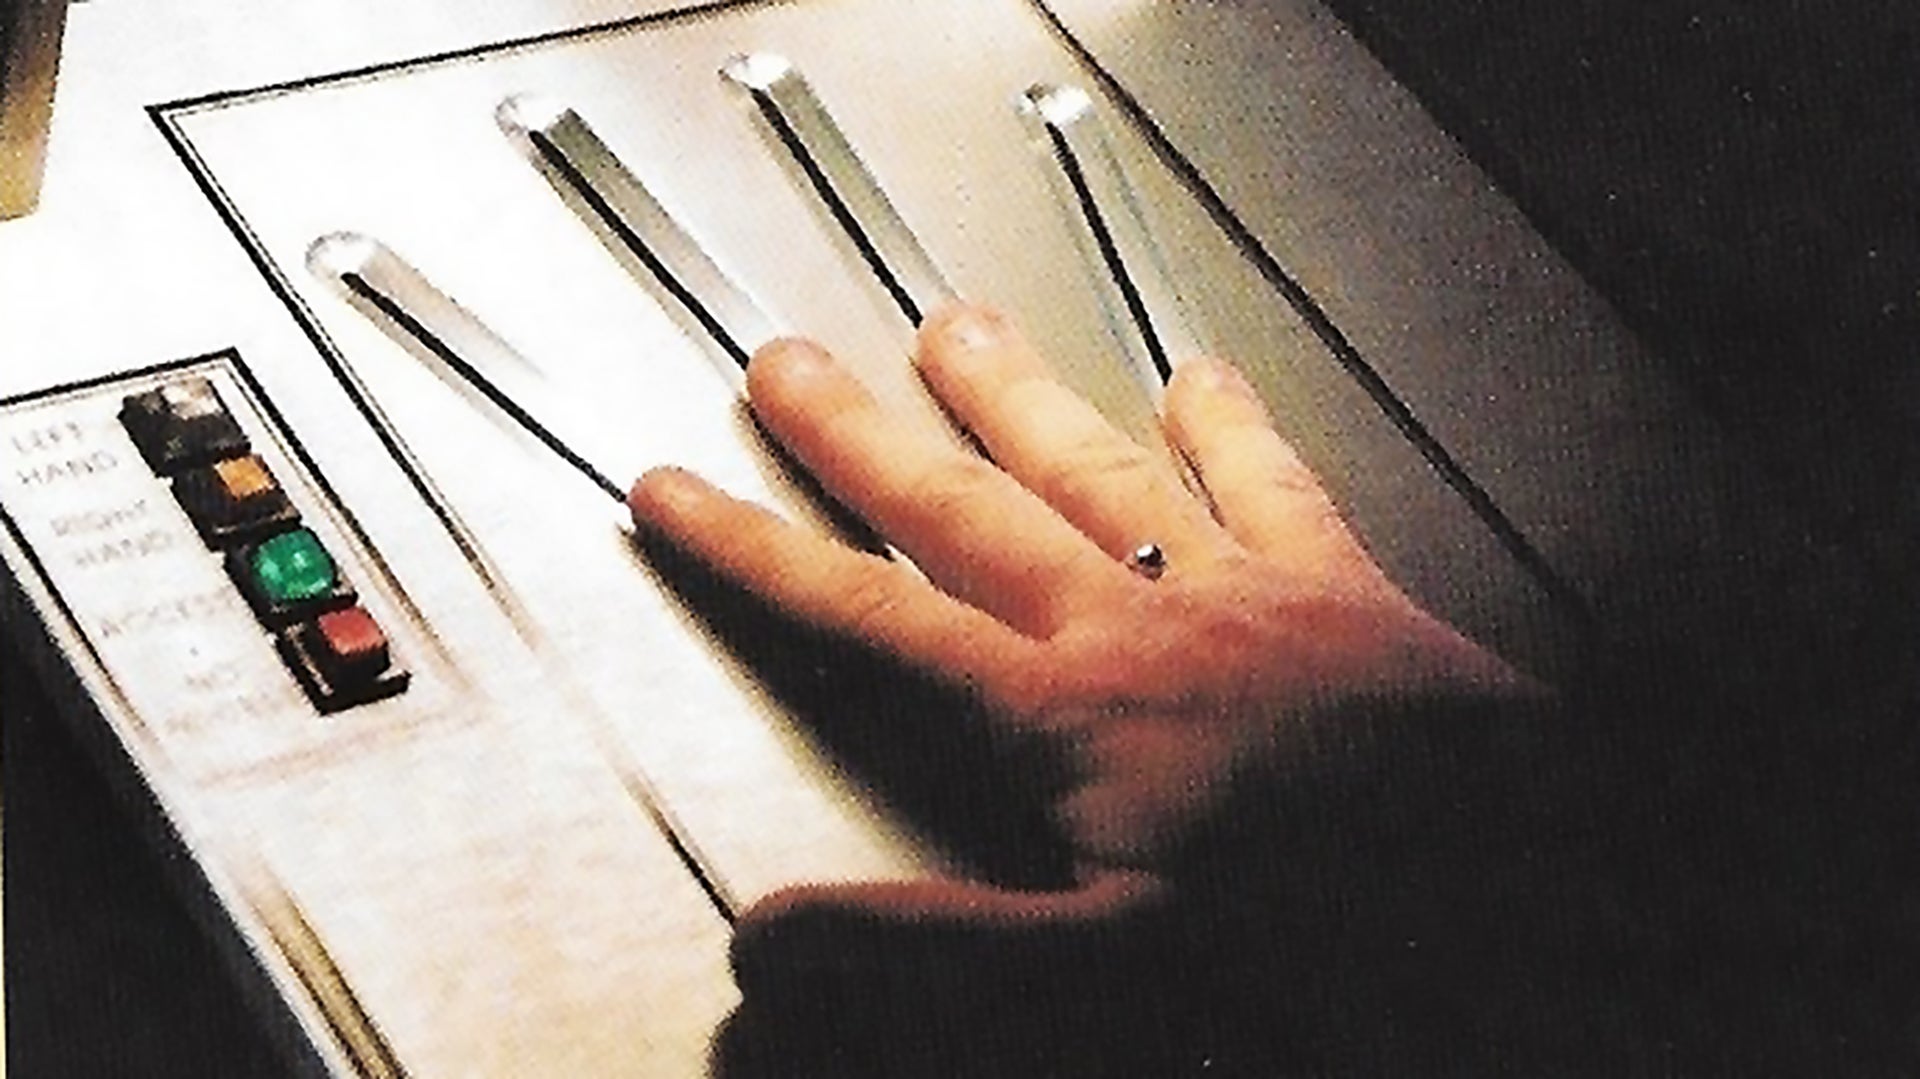 F-117 Program Used These Futuristic Hand Scanners While Highly Classified In The ’80s